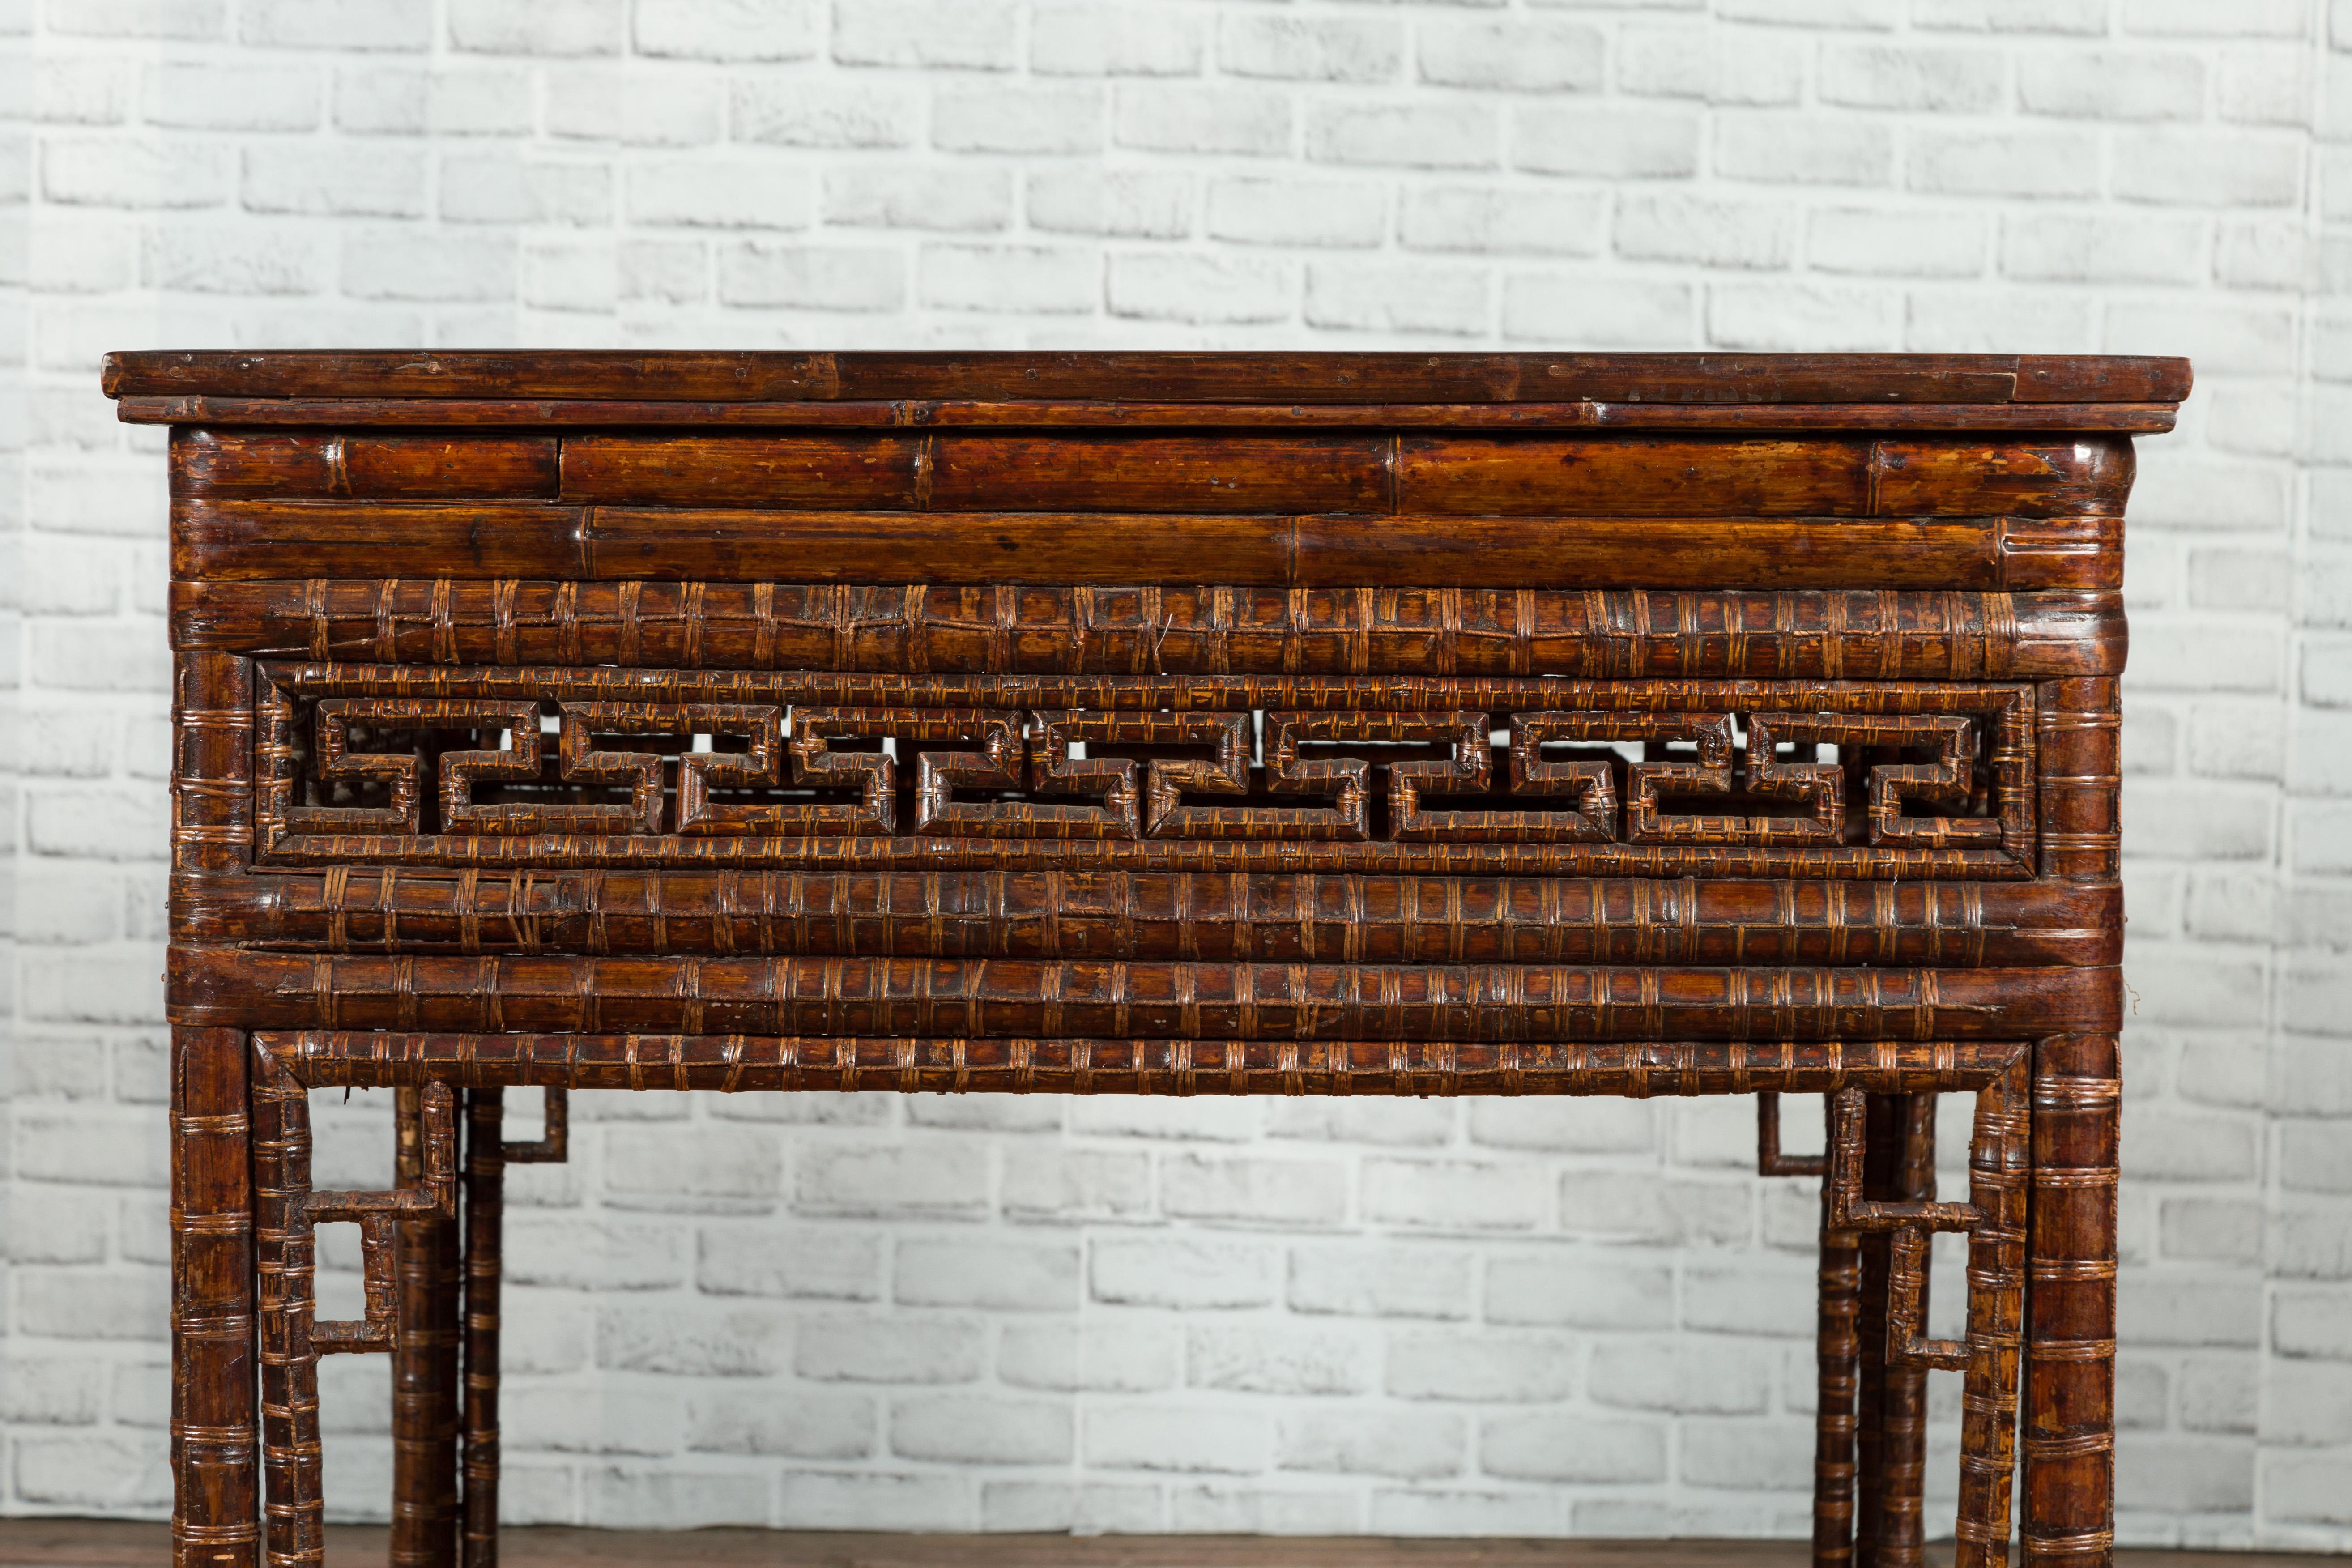 Chinese Qing Dynasty Period 19th Century Bamboo Hall Table with Fretwork Motifs For Sale 2